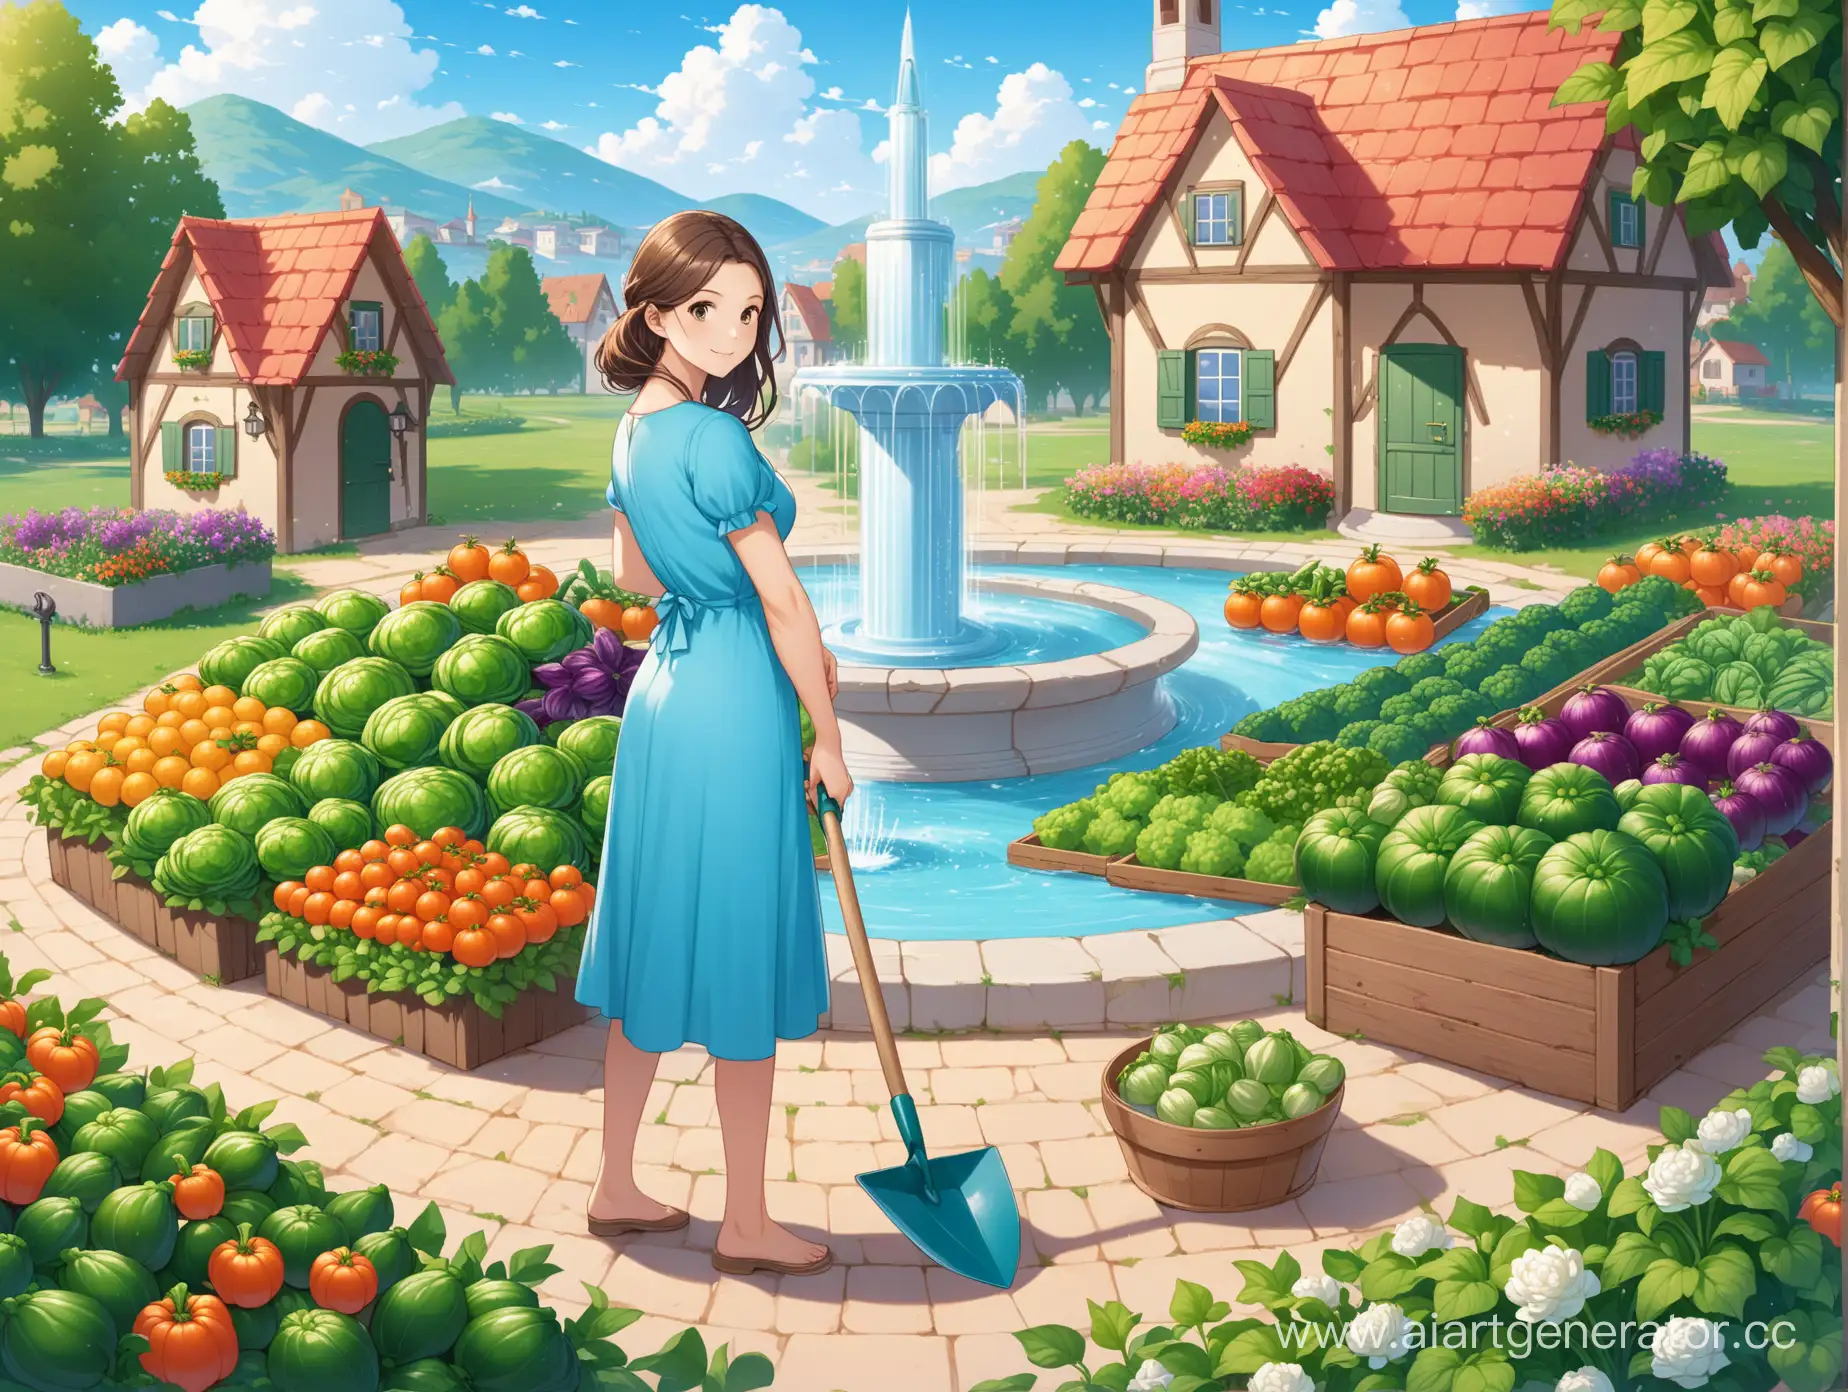 Woman-Gardening-in-Blue-Dress-with-Shovel-Surrounded-by-Vegetables-Flowers-Fountain-and-Small-House